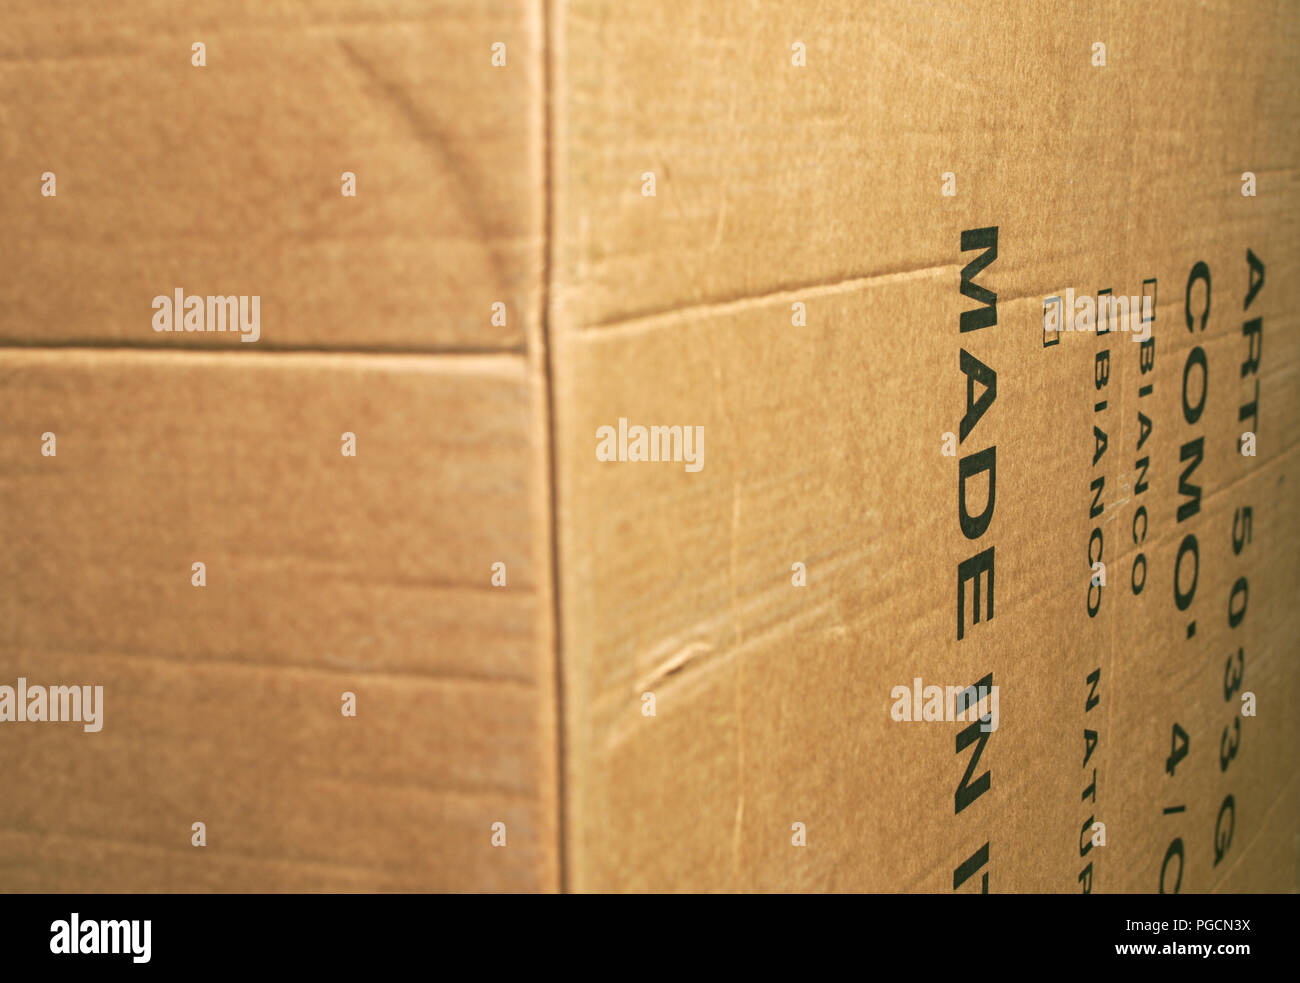 detail of delivery cardboard box with text Stock Photo